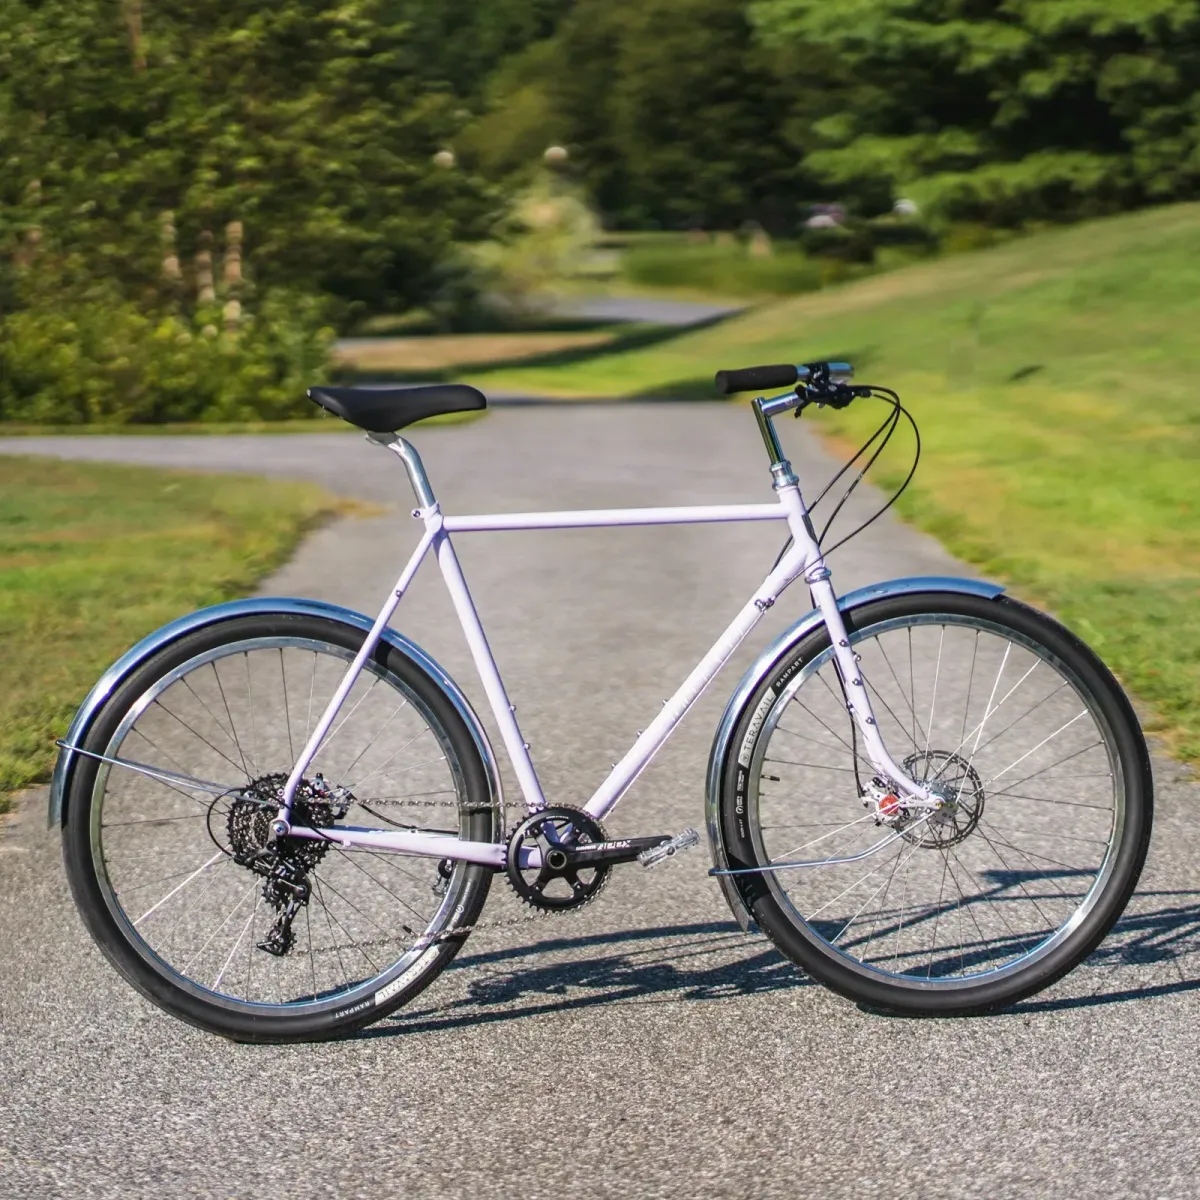 Velo Orange Piolet and Polyvalent Now Offered as Complete Bikes